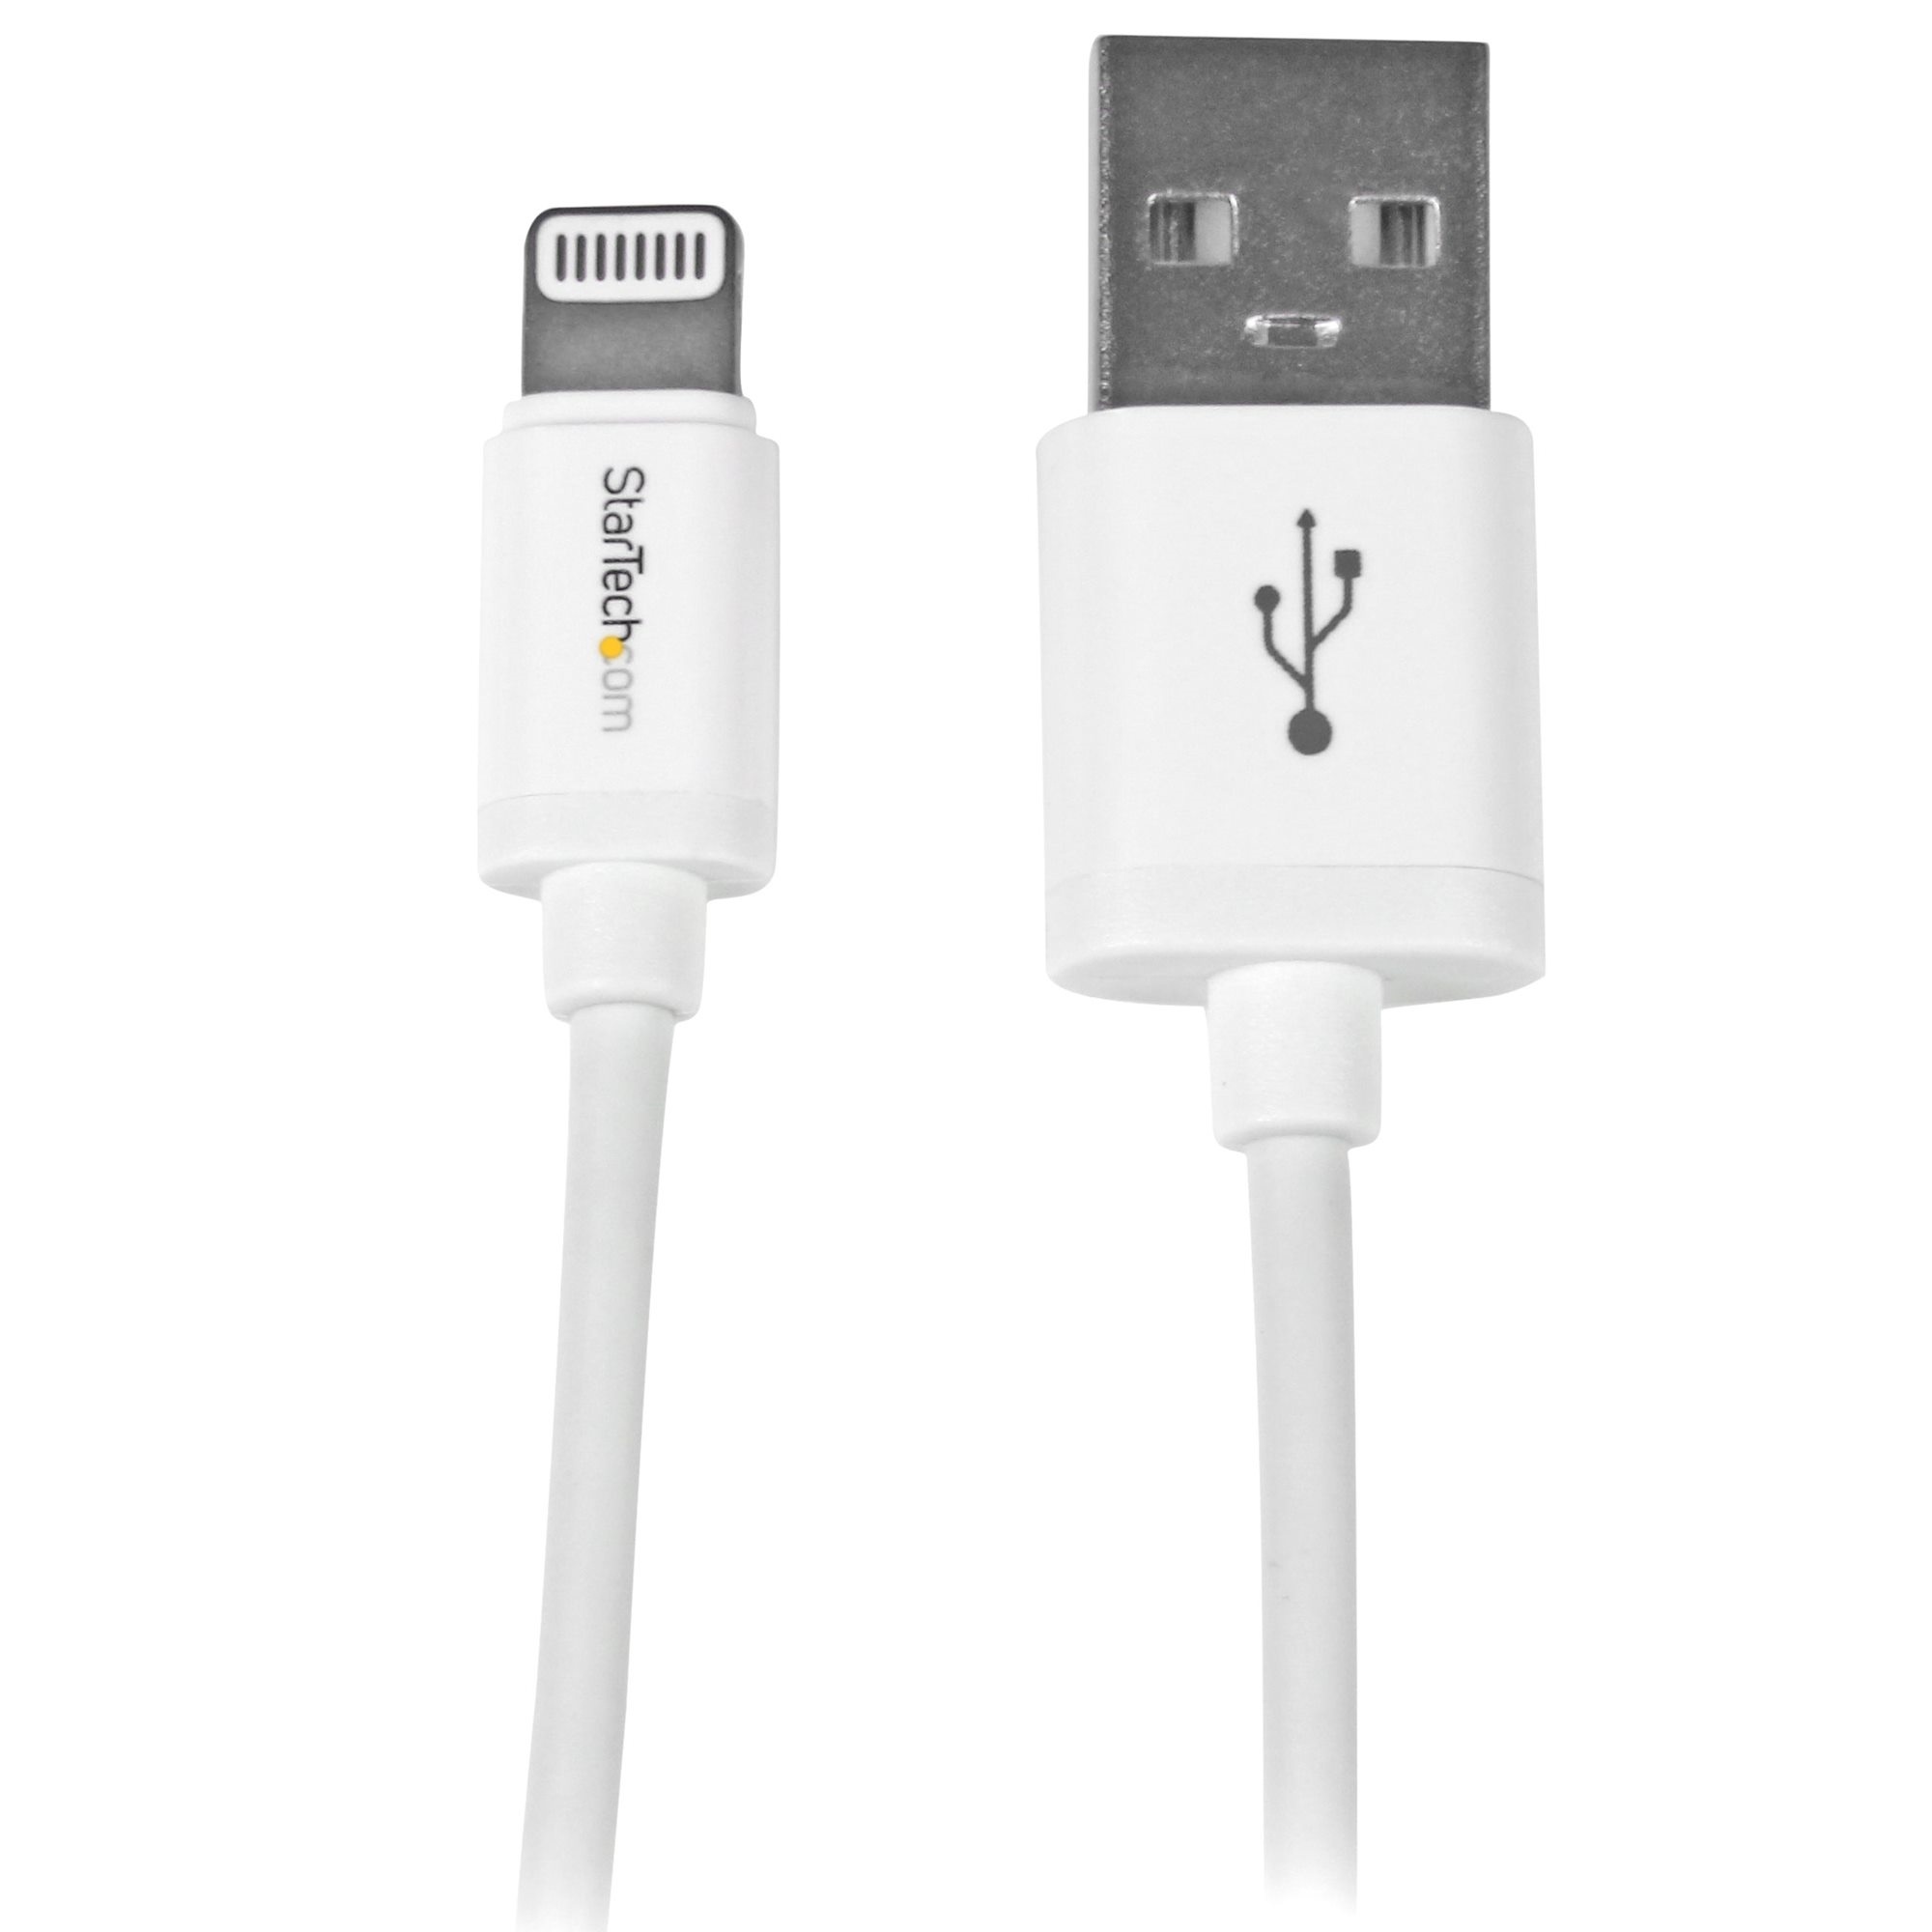 StarTech 8-pin Lightning to USB Cable (White, 30cm)